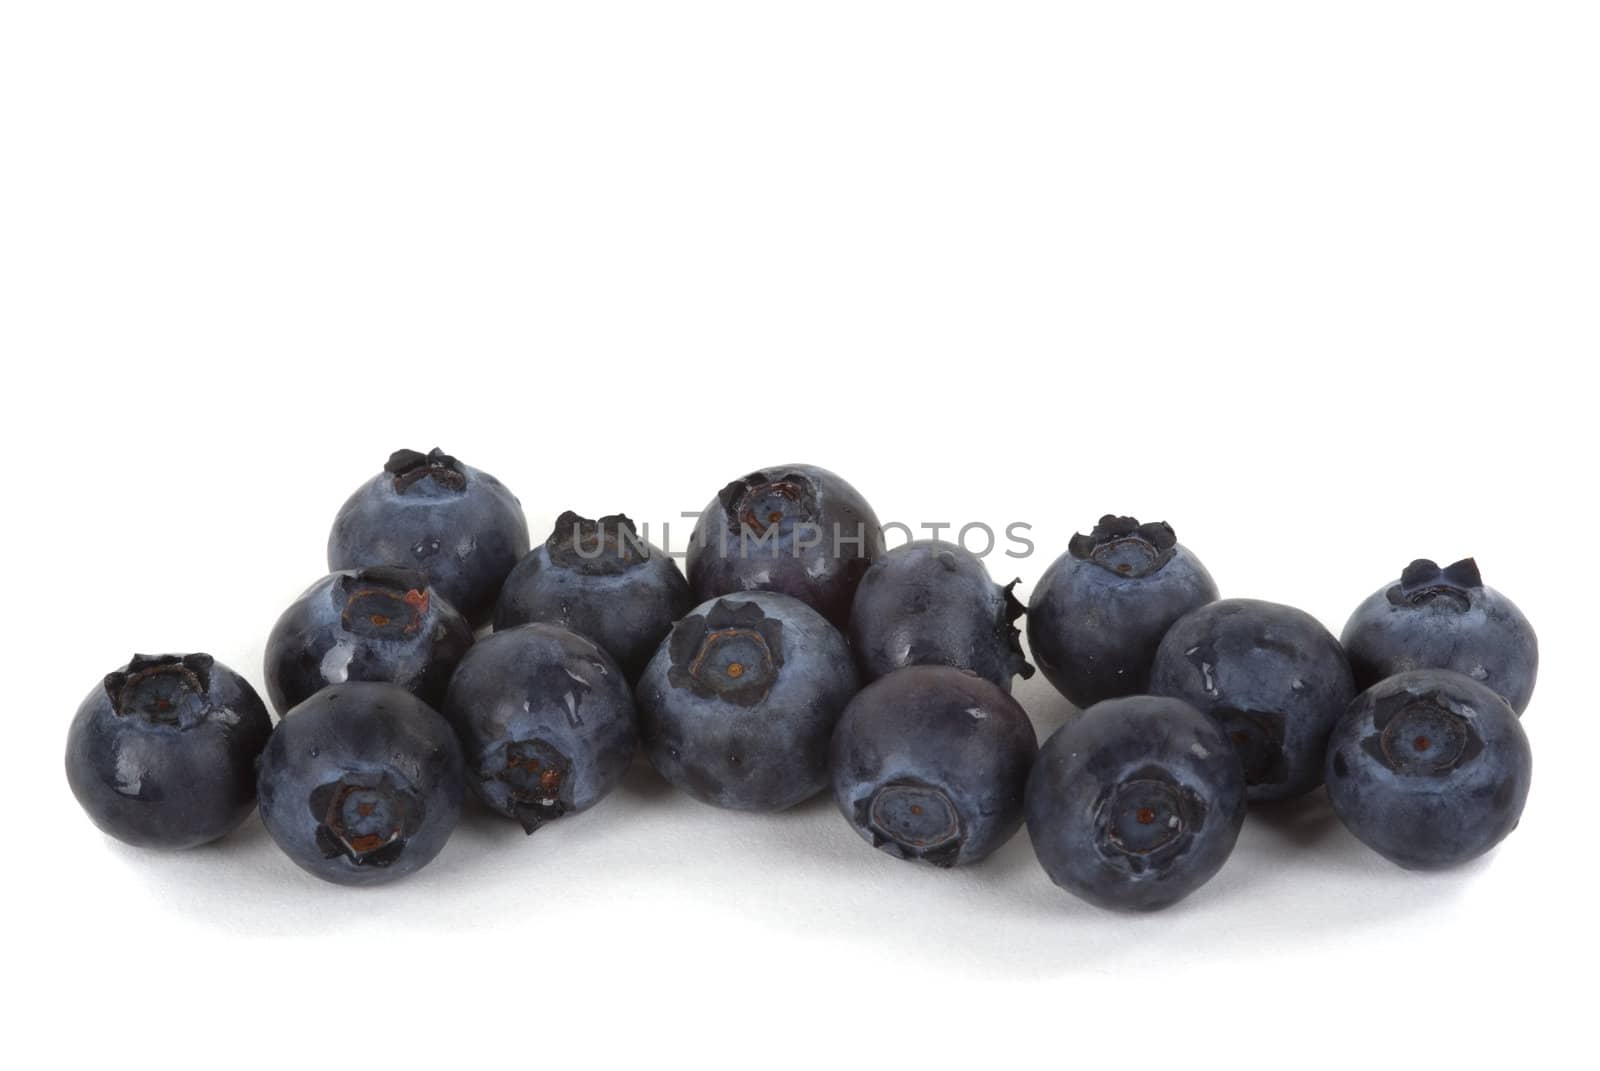 Blueberries by BVDC